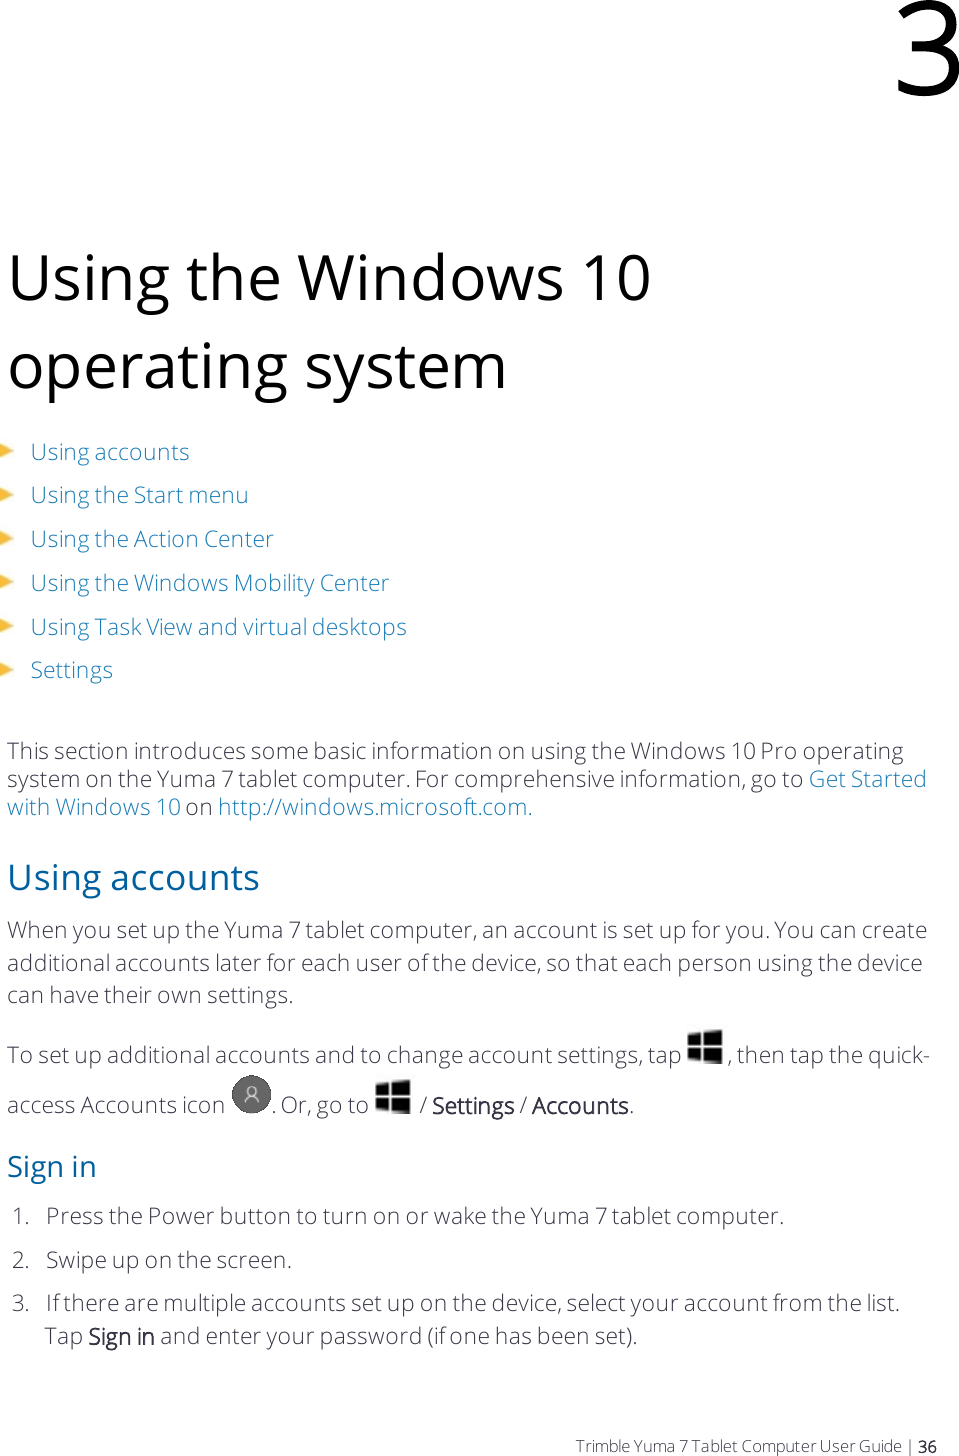 Using the Windows 10 operating systemUsing accountsUsing the Start menuUsing the Action CenterUsing the Windows Mobility CenterUsing Task View and virtual desktopsSettingsThis section introduces some basic information on using the Windows 10 Pro operating system on the  Yuma 7 tablet computer. For comprehensive information, go to Get Started with Windows 10 on http://windows.microsoft.com.Using accountsWhen you set up the  Yuma 7 tablet computer, an account is set up for you. You can create additional accounts later for each user of the device, so that each person using the device can have their own settings.To set up additional accounts and to change account settings, tap  , then tap the quick-access Accounts icon  . Or, go to   / Settings / Accounts.Sign in1.  Press the Power button to turn on or wake the  Yuma 7 tablet computer.2.  Swipe up on the screen.3.  If there are multiple accounts set up on the device, select your account from the list. Tap Sign in and enter your password (if one has been set).3Trimble Yuma 7 Tablet Computer User Guide | 36